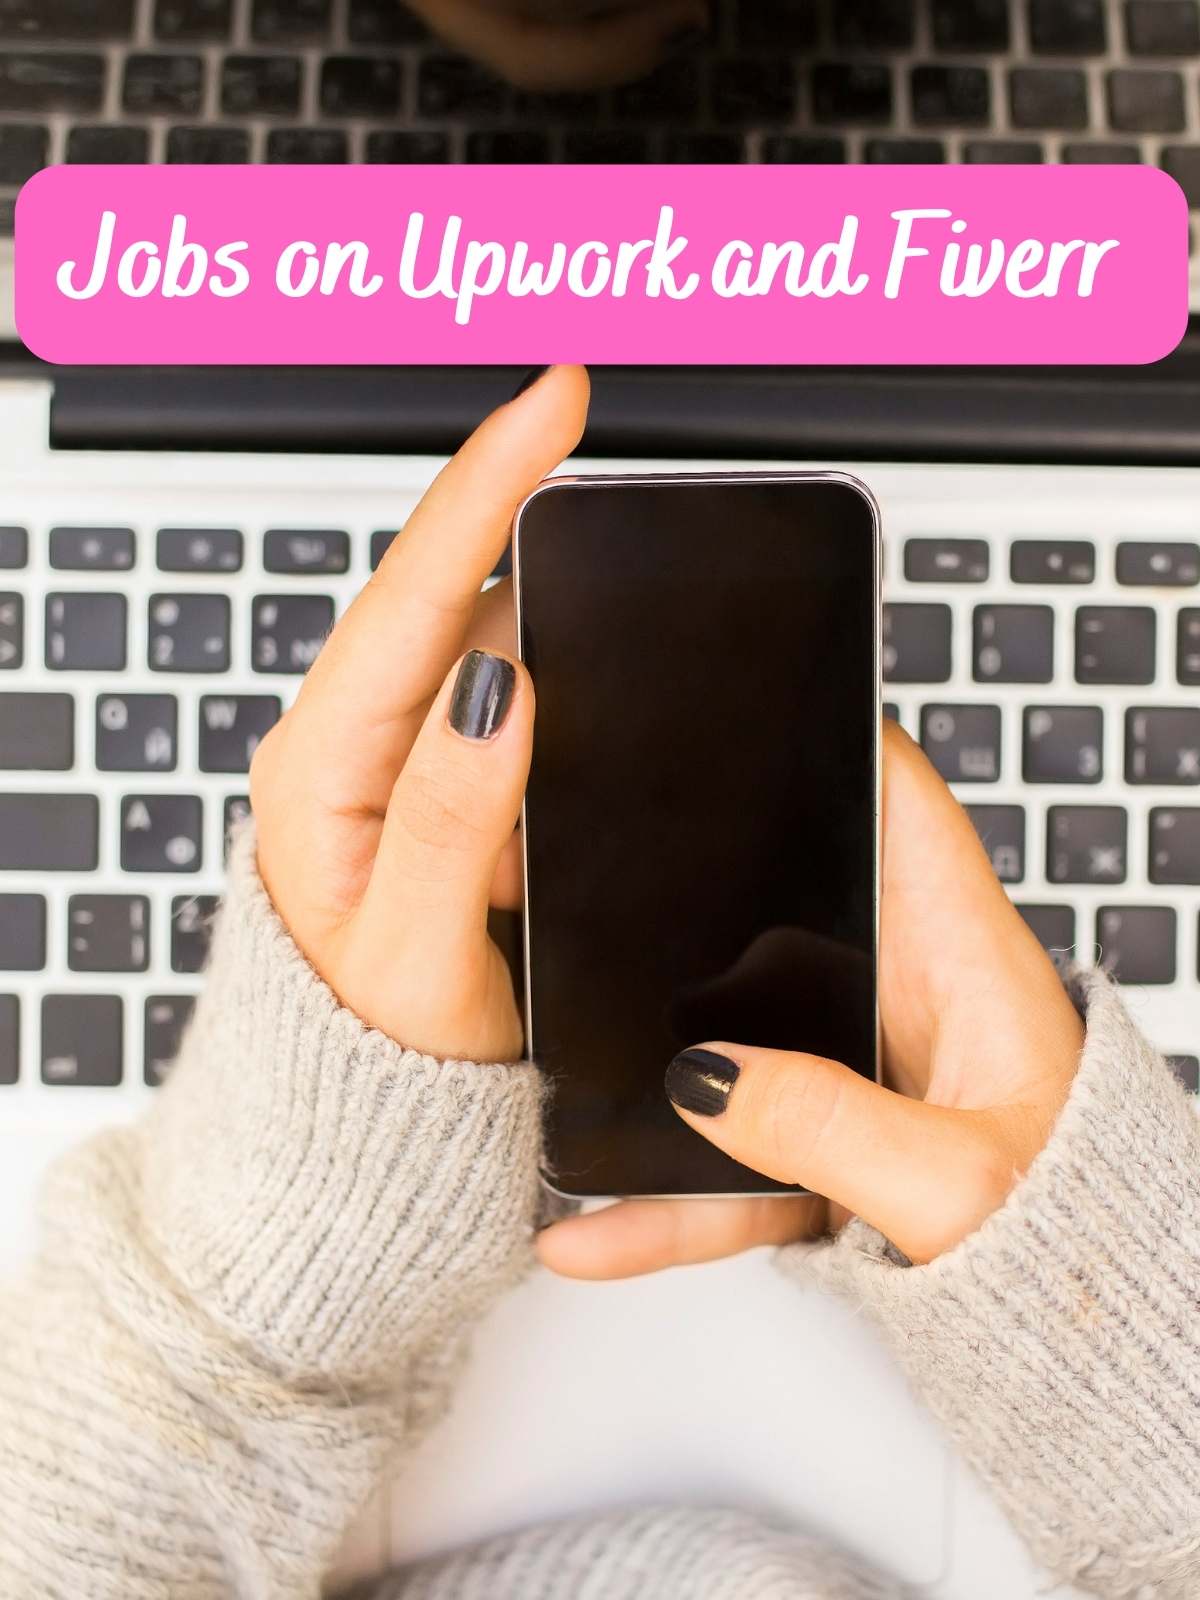 Jobs on Upwork and Fiverr